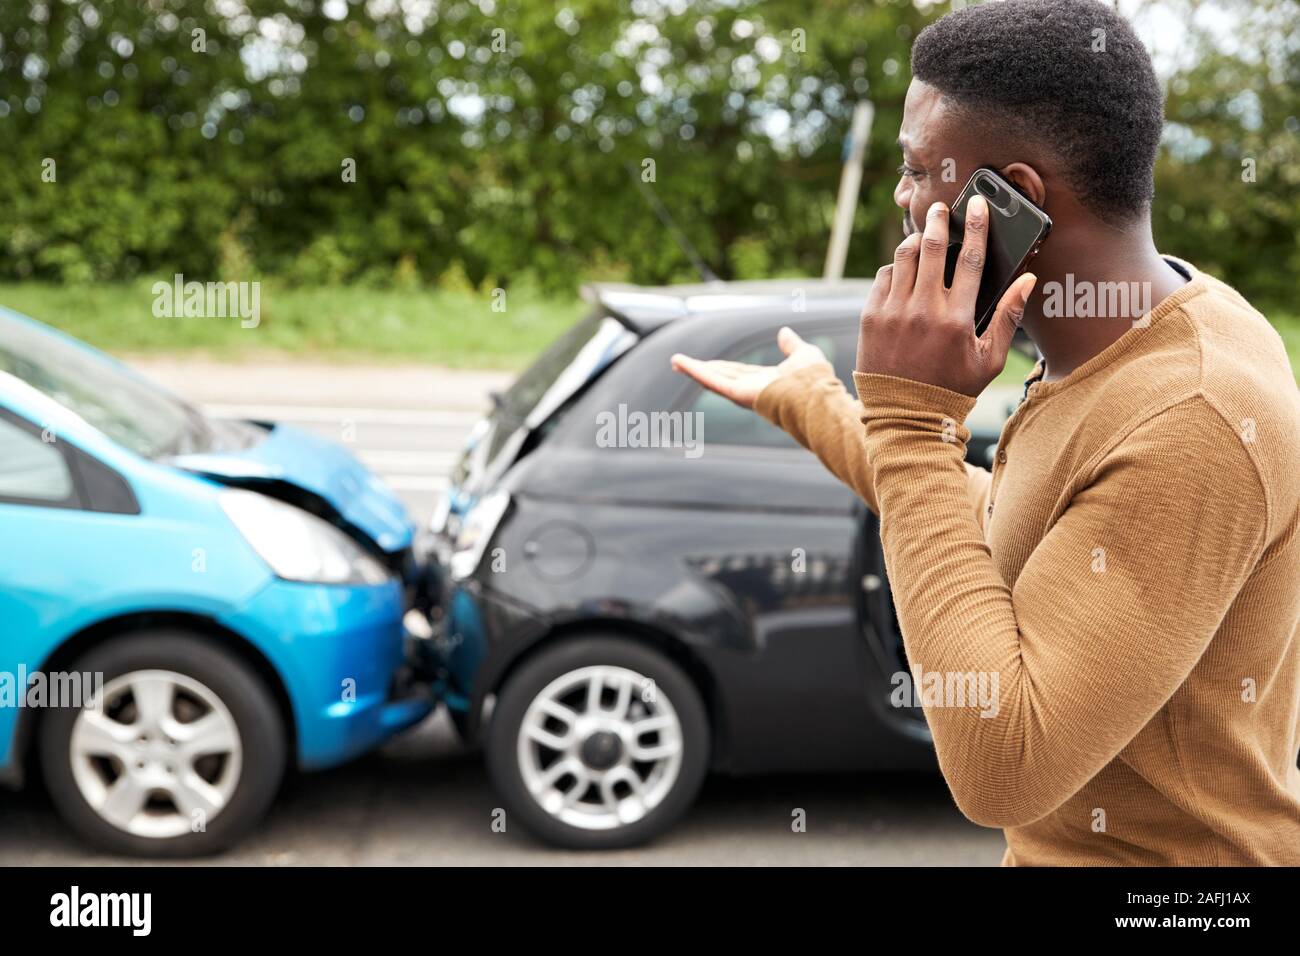 Male Motorist Involved In Car Accident Calling Insurance Company Or Recovery Service Stock Photo